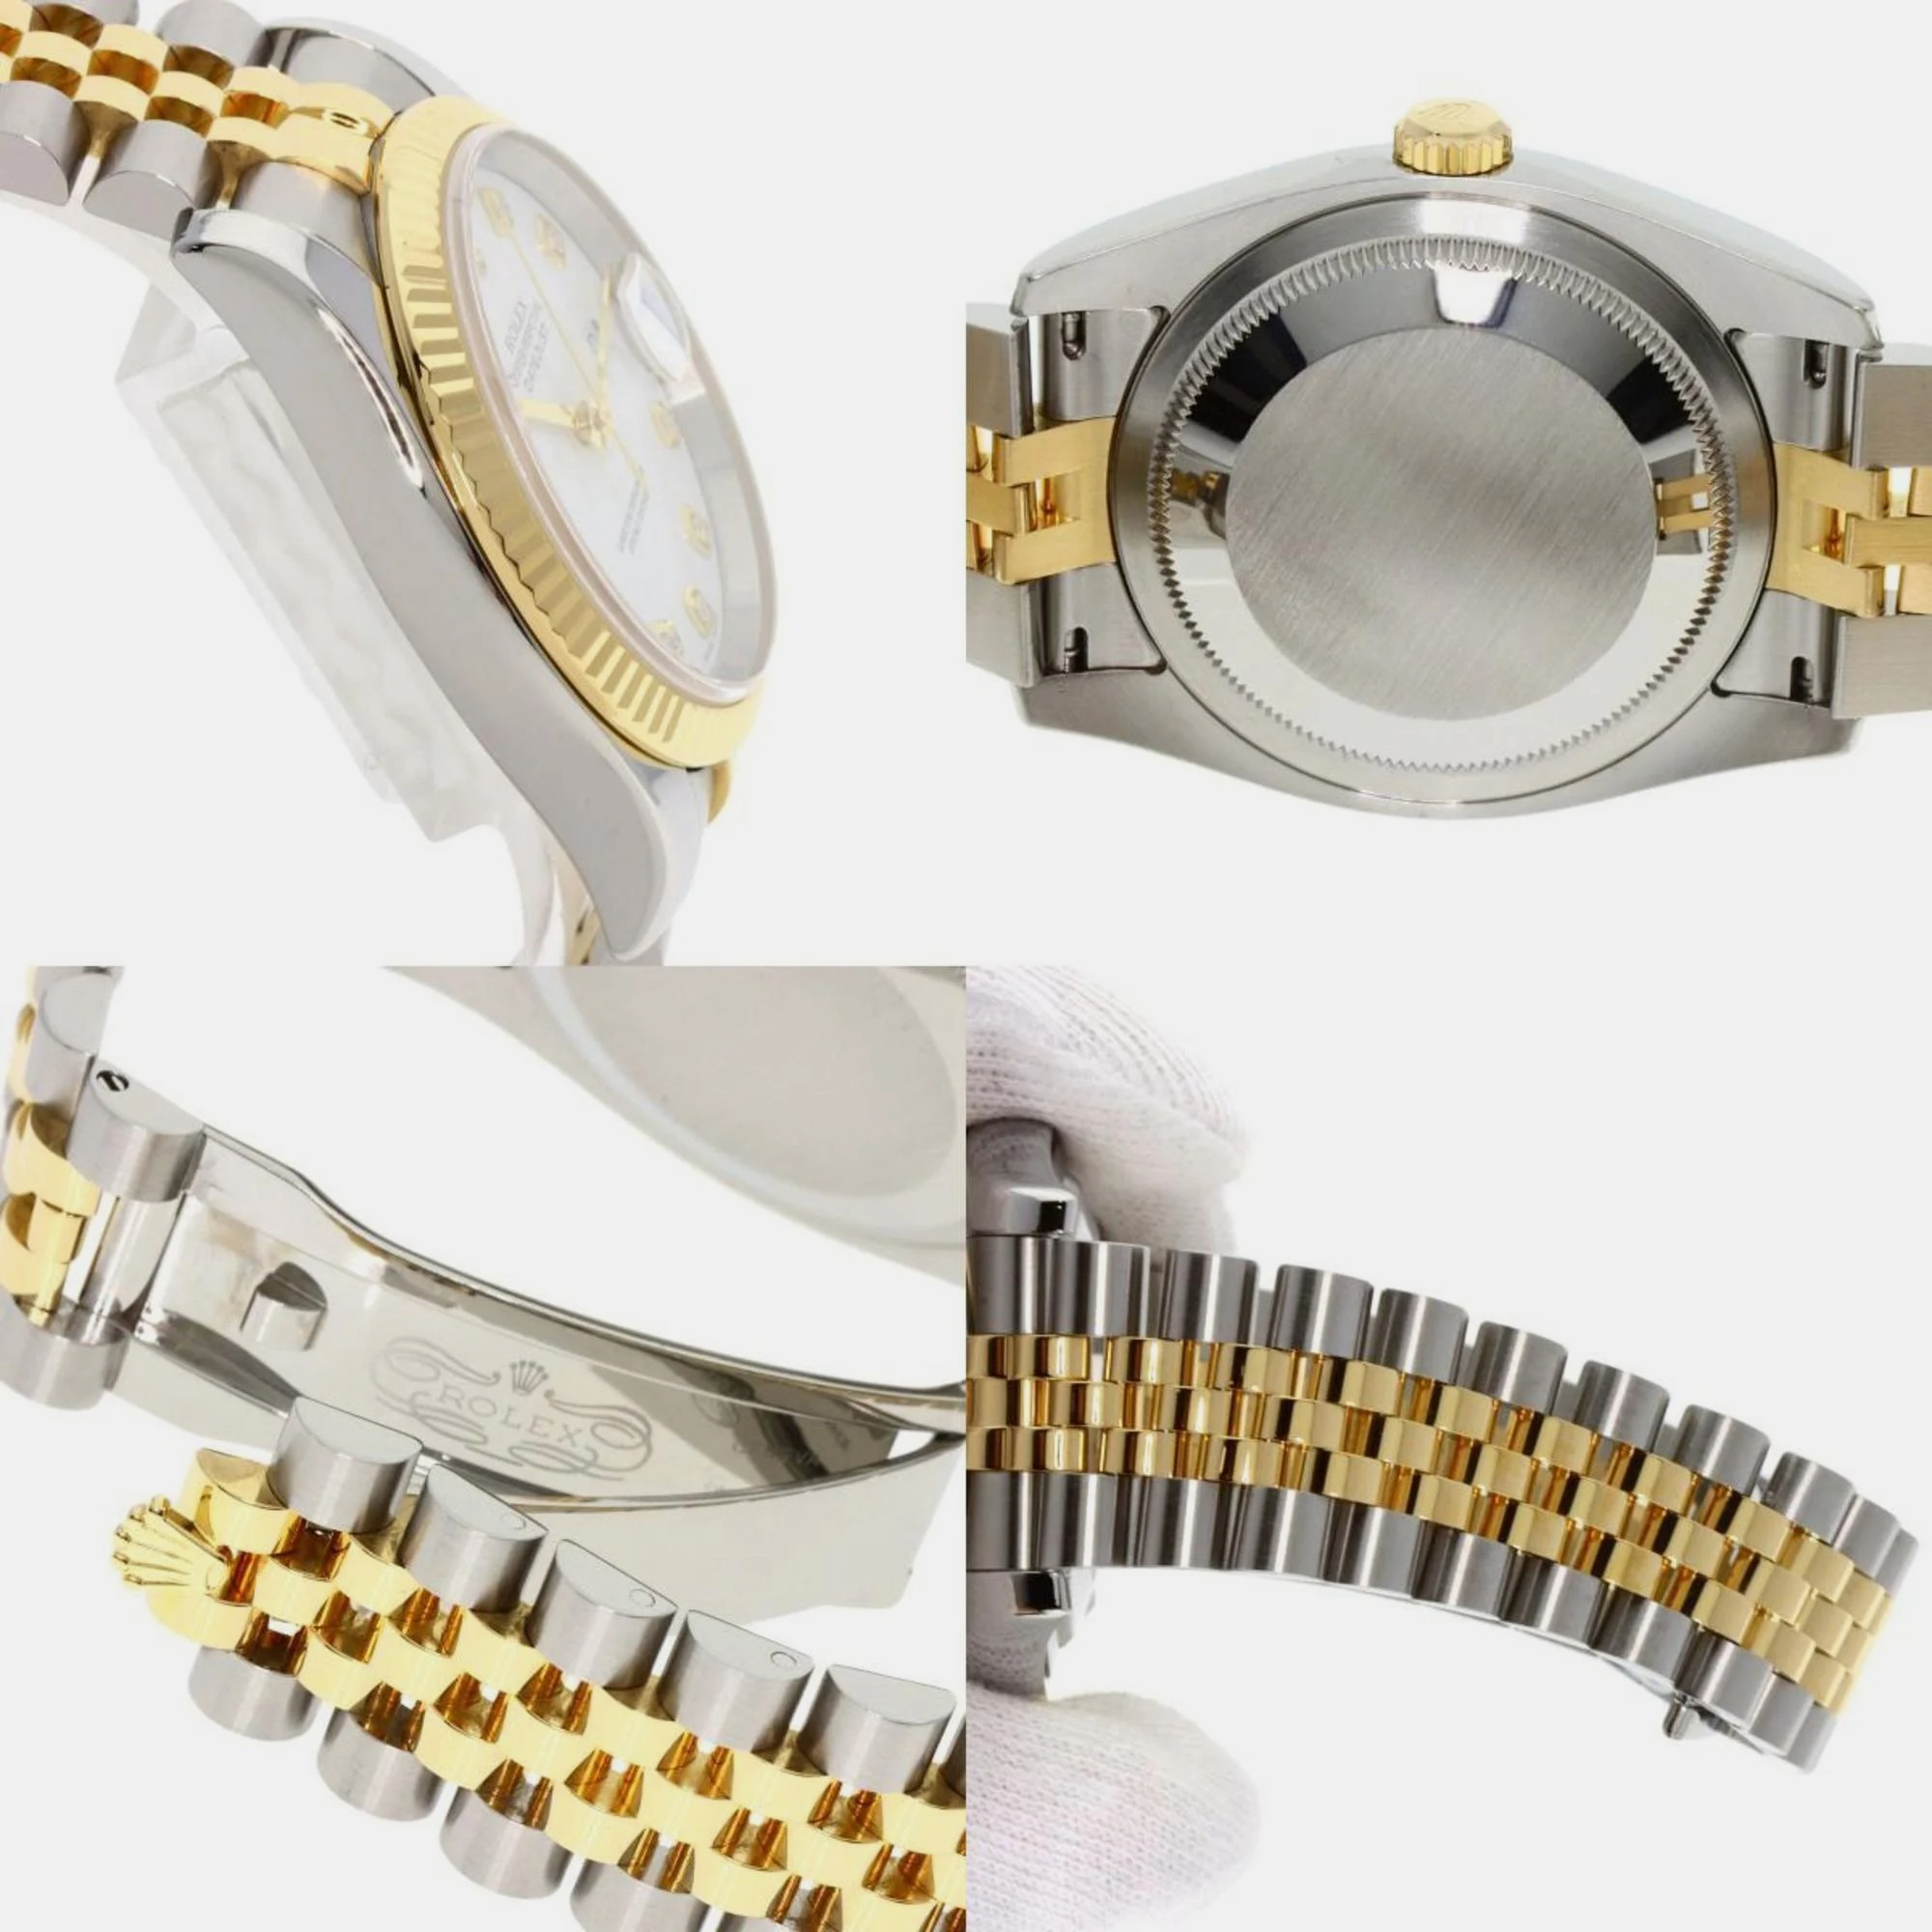 Rolex White  Diamond 18k Yellow Gold And Stainless Steel Datejust 116233 Automatic Men's Wristwatch 36 Mm